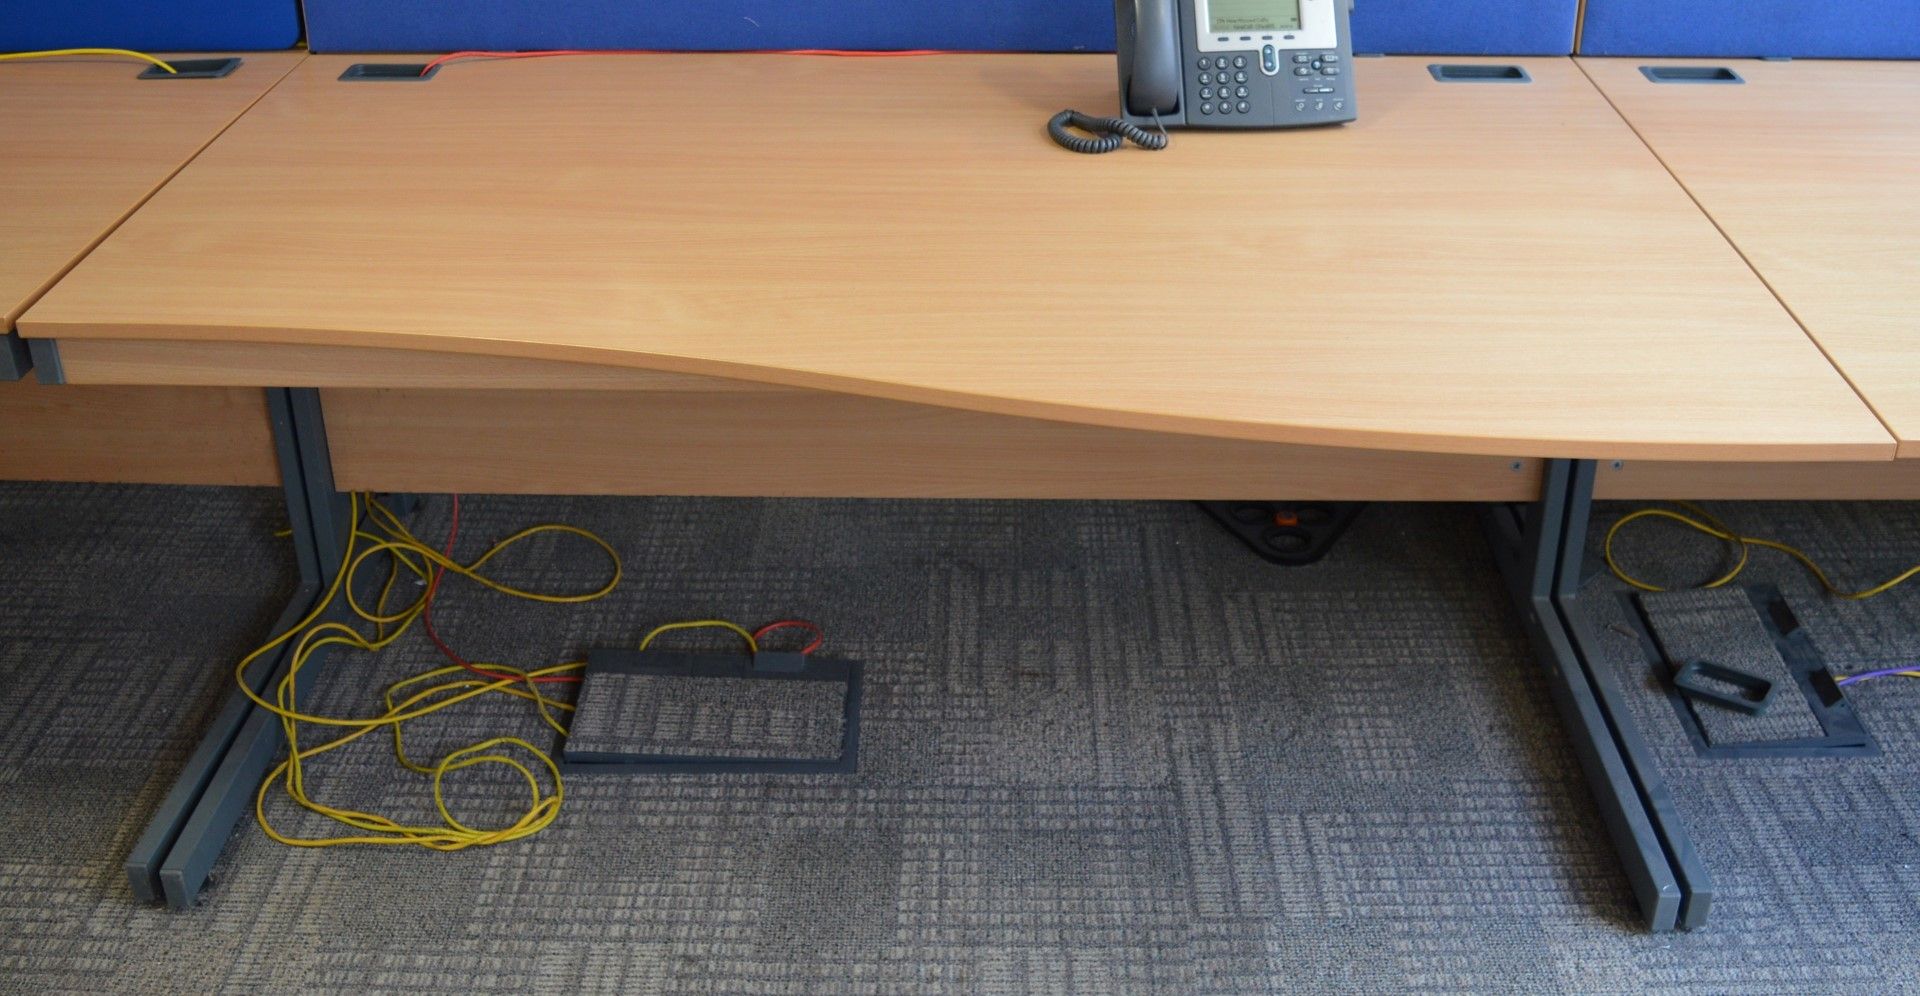 1 x Imperial Office Desk - Right Hand - Quality Beech Desk With Grey Coated Steel Frame - H71 x W160 - Image 3 of 4